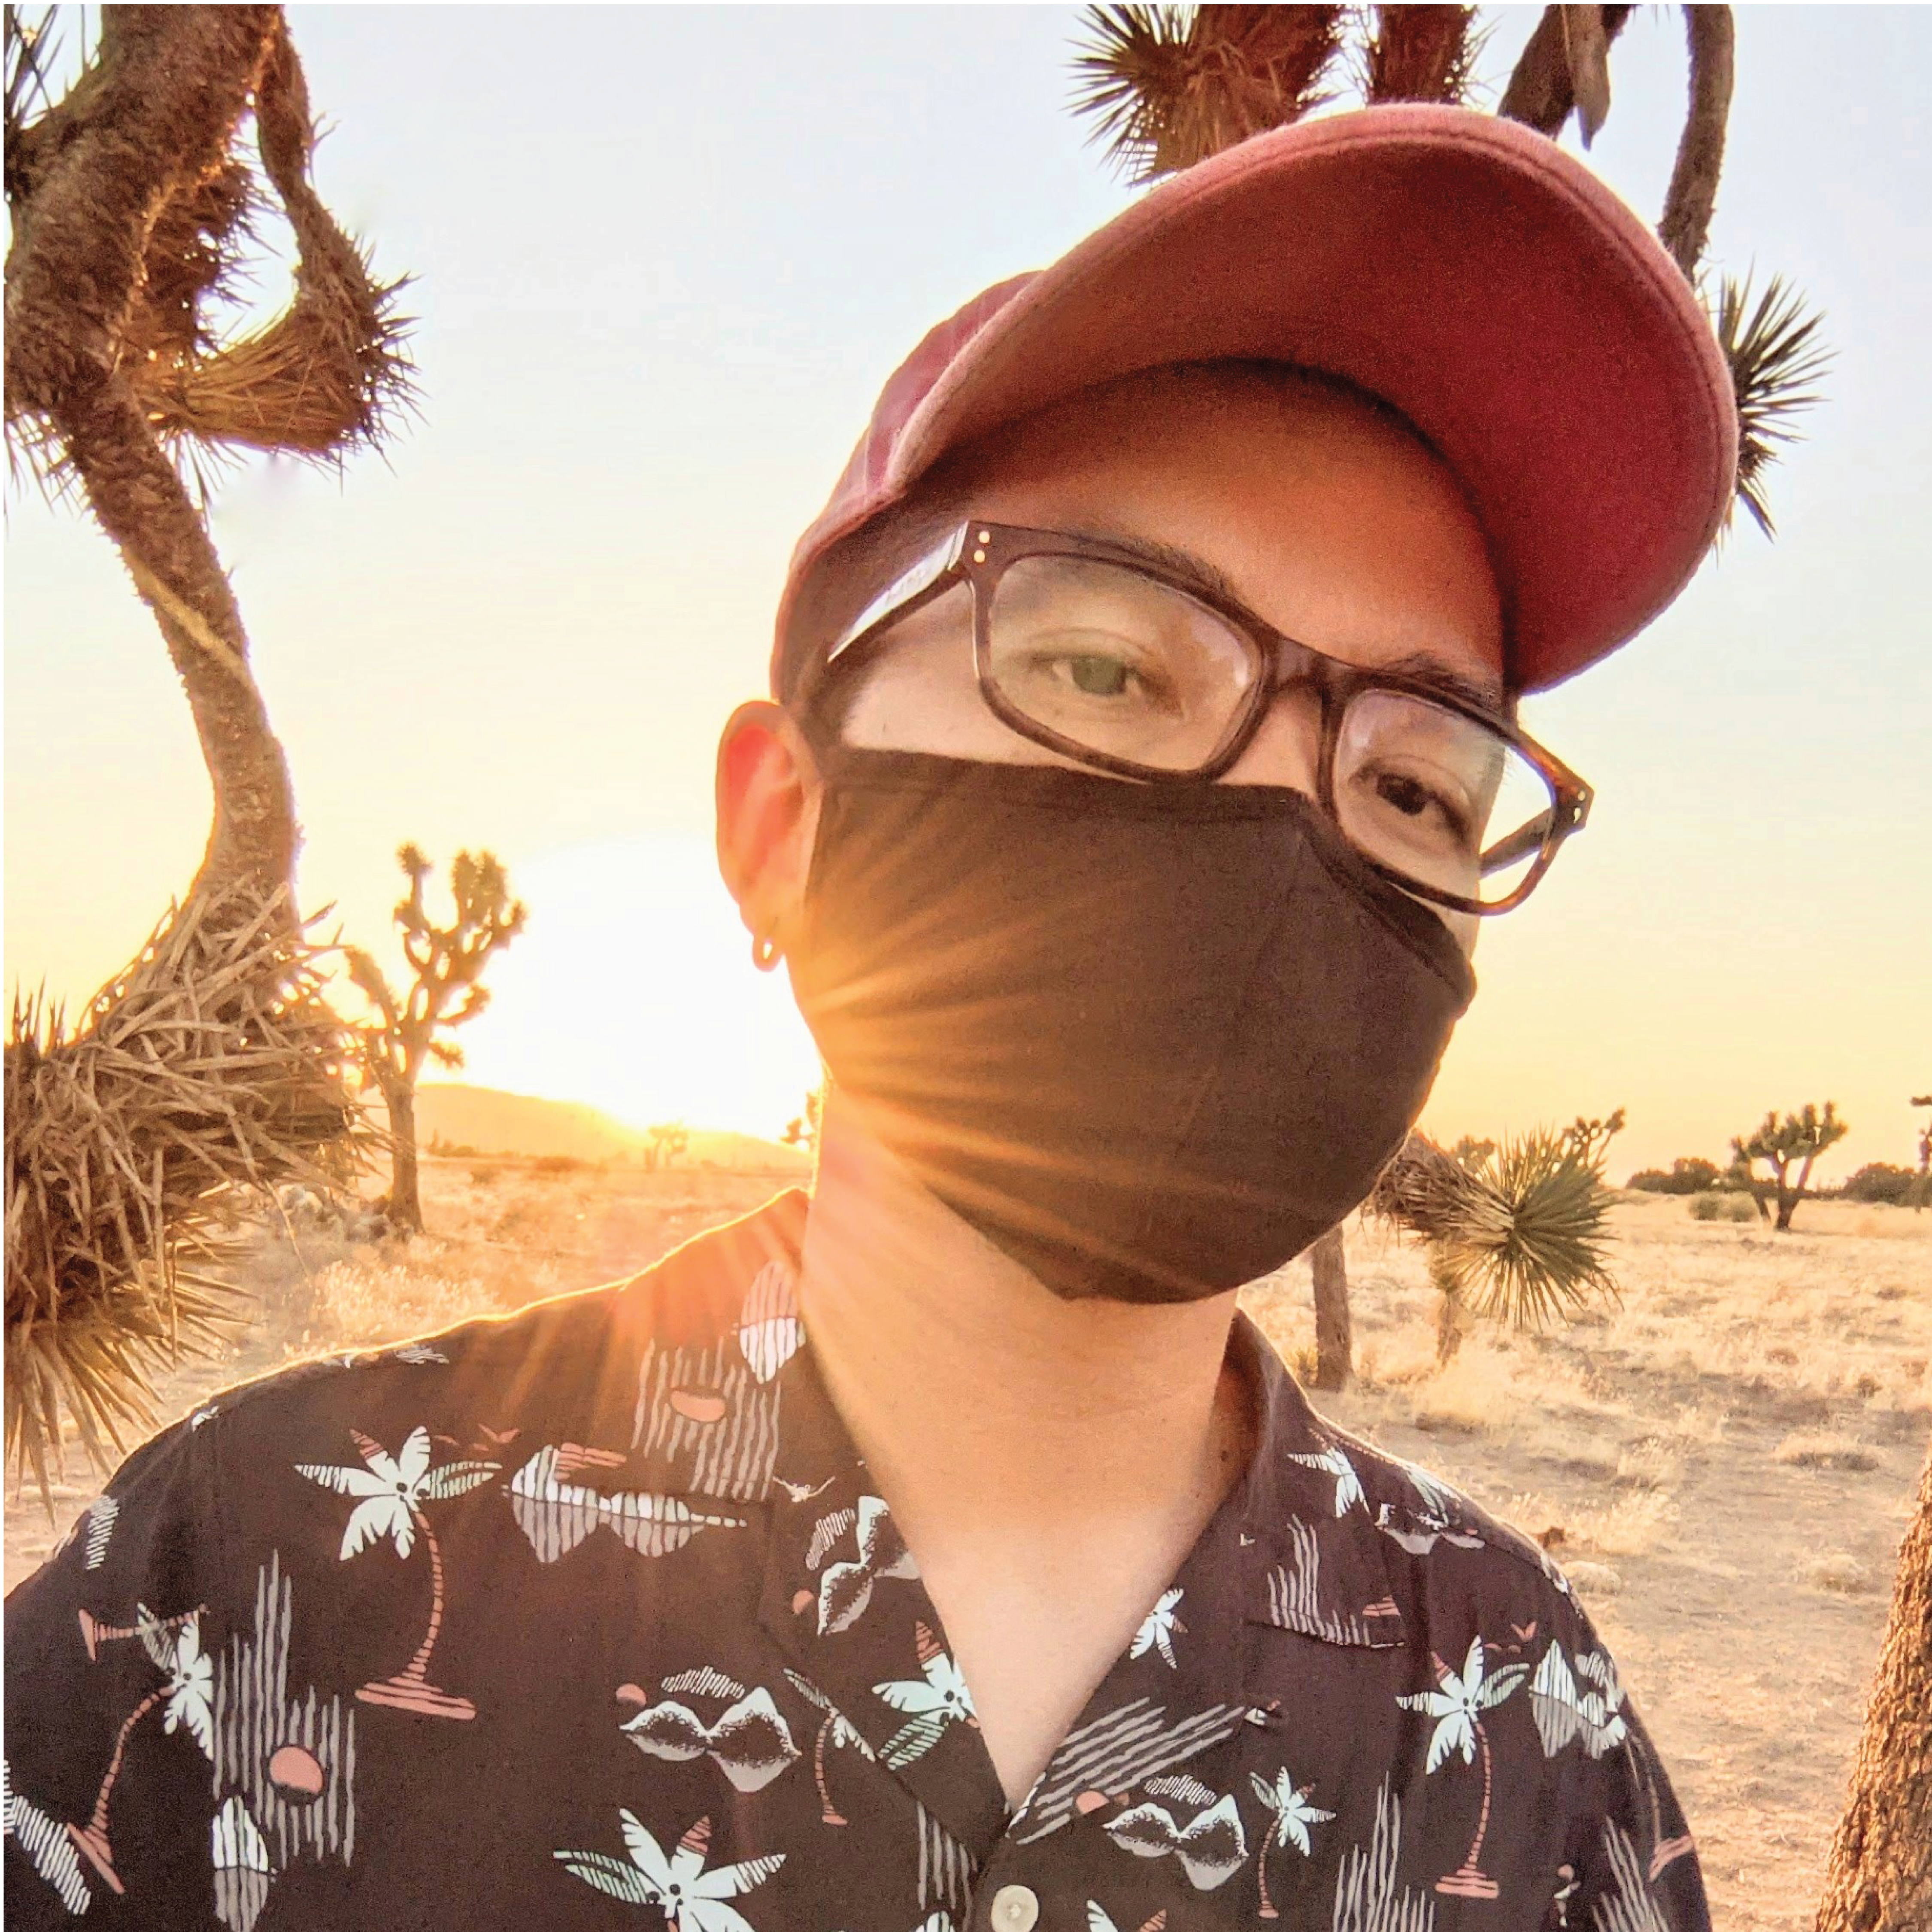 A short-haired person with glasses, a small black round earring on the right ear, and black mask wearing a pink cap and gray shirt, with patterns of a beachy scenery with palm trees, the sun and mountains, designed in a simple silhouette pattern in shades of pink and light teal. The background is a desert with joshua trees. The setting sun sits on the mountains on the horizon by the person's right shoulder, its golden rays reaches out behind the ear and across the person's cheeks, giving the right ear a deep orange color. Its light paints highlights on the tree at the far right of the image, and overall creating a warm yellow-orange tone.
